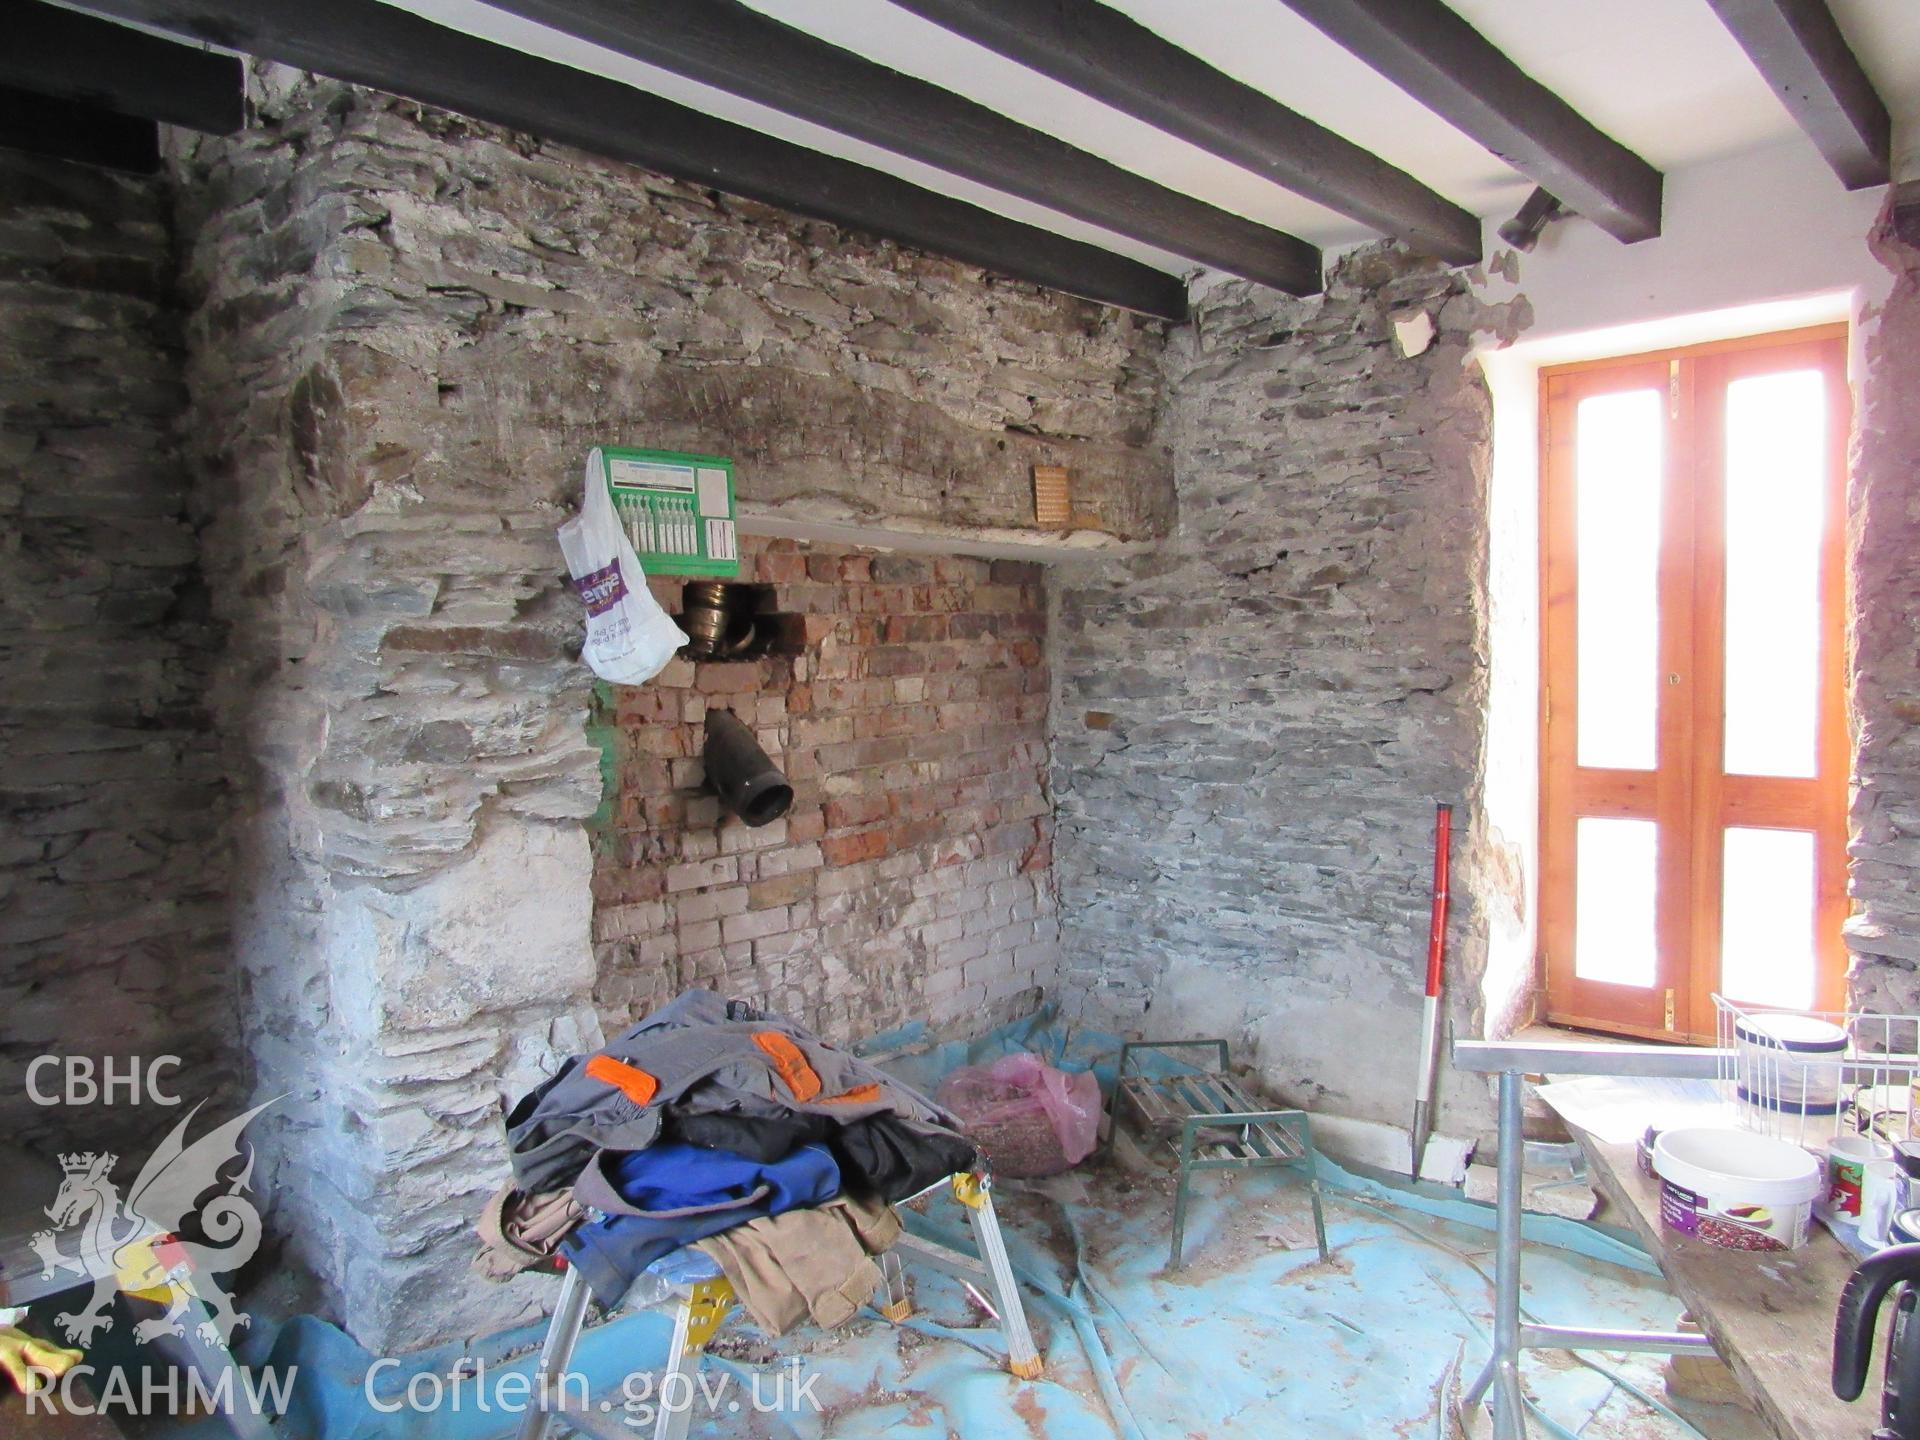 The lounge with fireplace and inserted door, view south. 1m scale. Photographed as part of archaeological building recording conducted at Bryn Ysguboriau, Llanelidan, Denbighshire, carried out by Archaeology Wales, 2018. Project no. P2587.